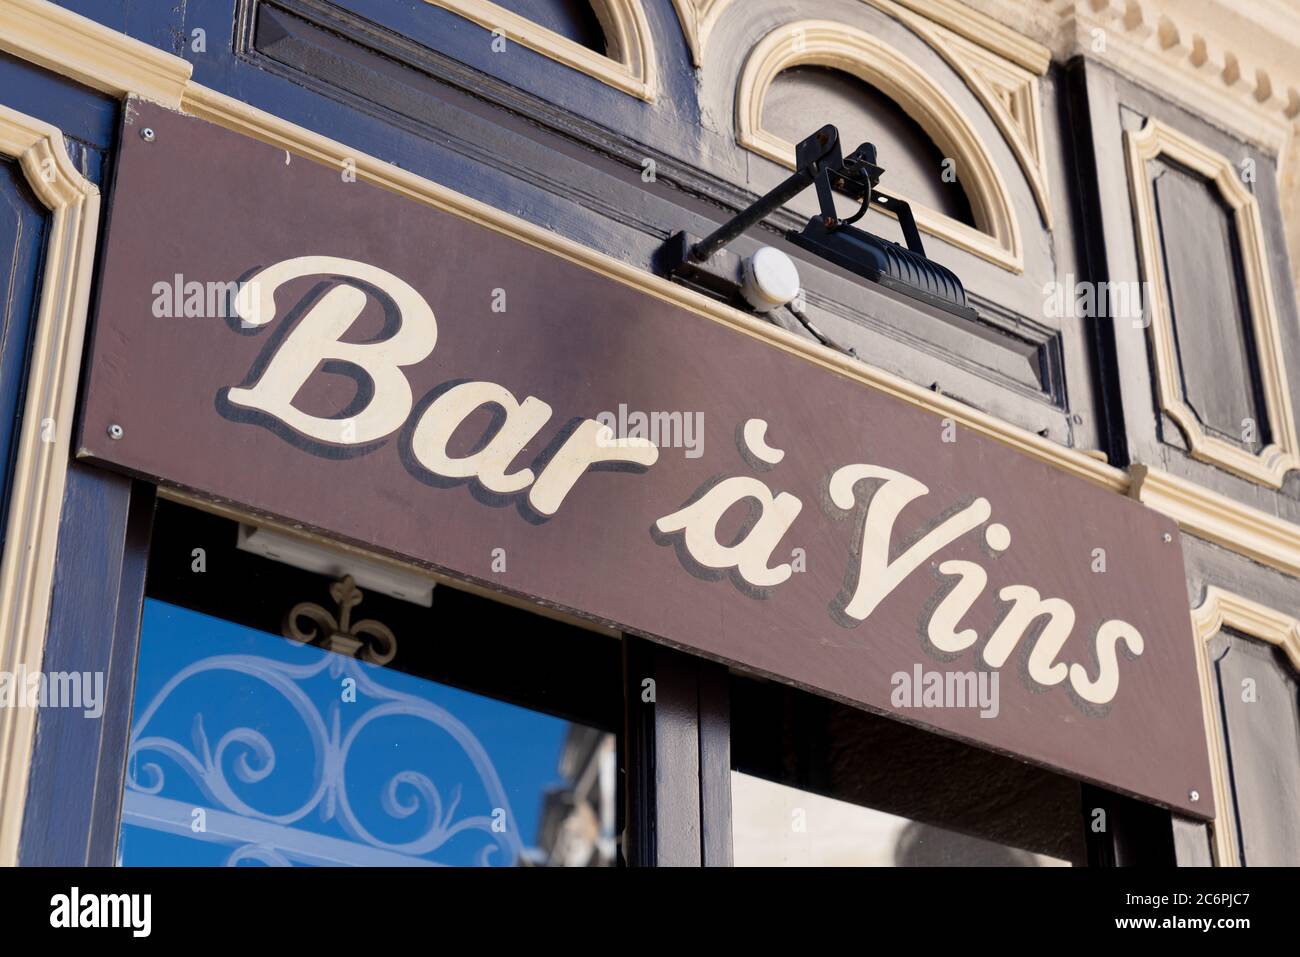 Bar à Vins means wine bar in french in bordeaux city France Stock Photo